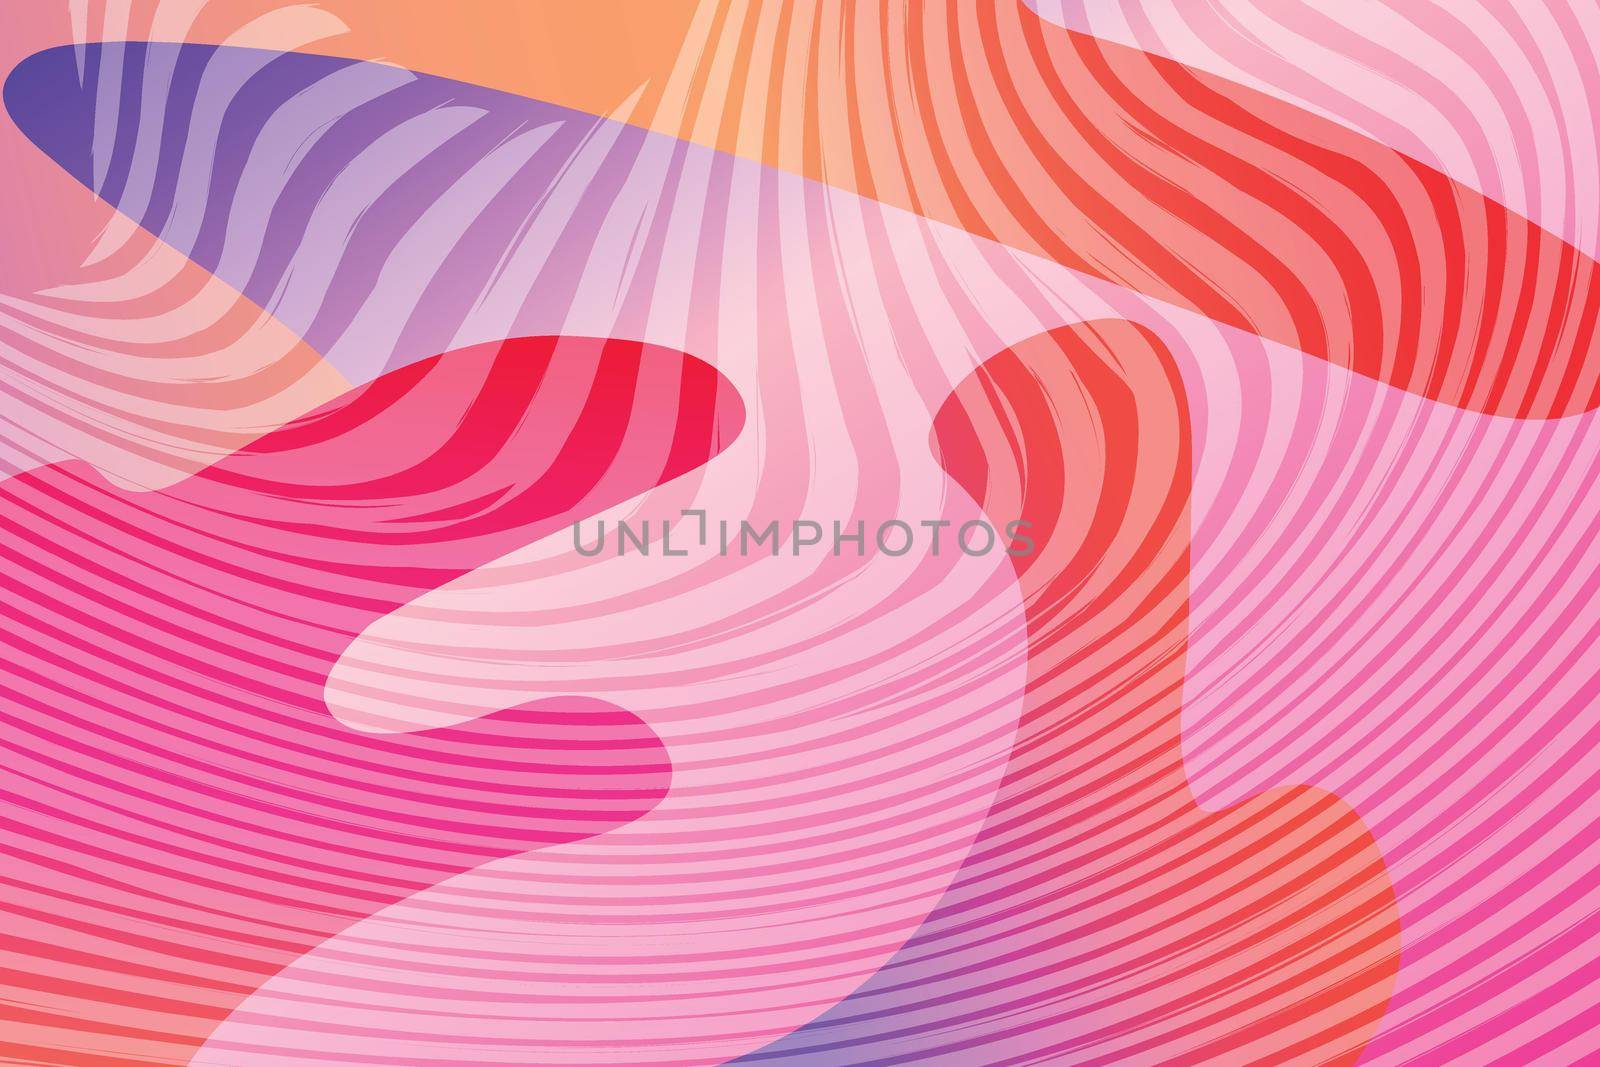 Abstract background with colorful fluid shapes, gradient waves, geometric lines, dynamical forms. Design for poster, banner, card. Abstract liquid illustration. 3D paper images with a subtle blend.